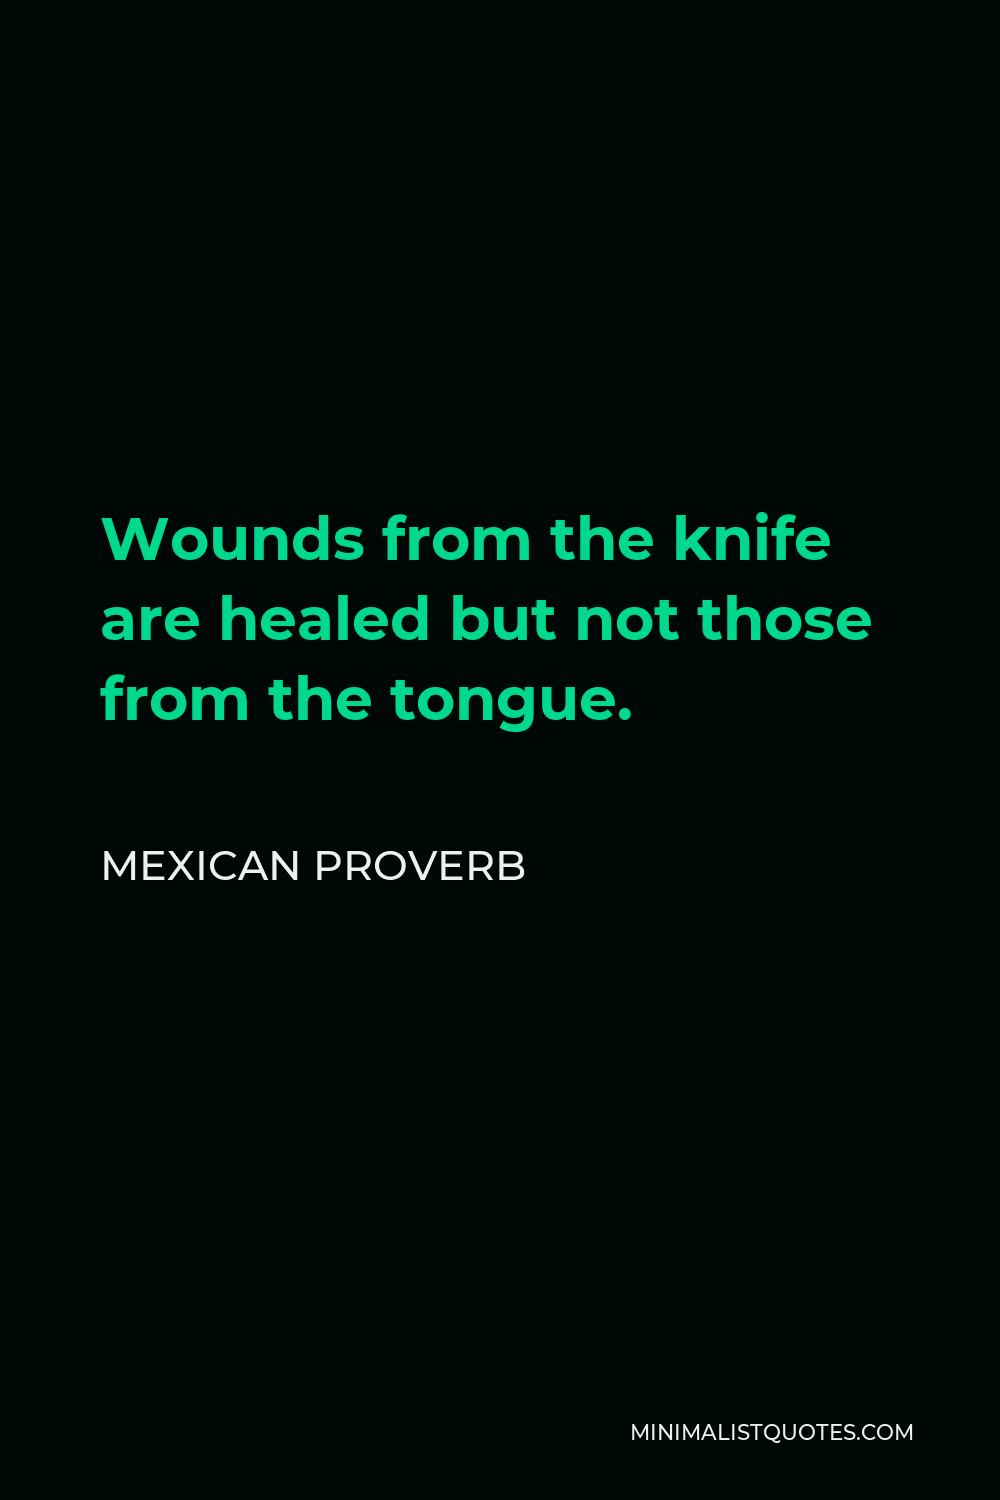 Mexican Proverb Quote - Wounds from the knife are healed but not those from the tongue.